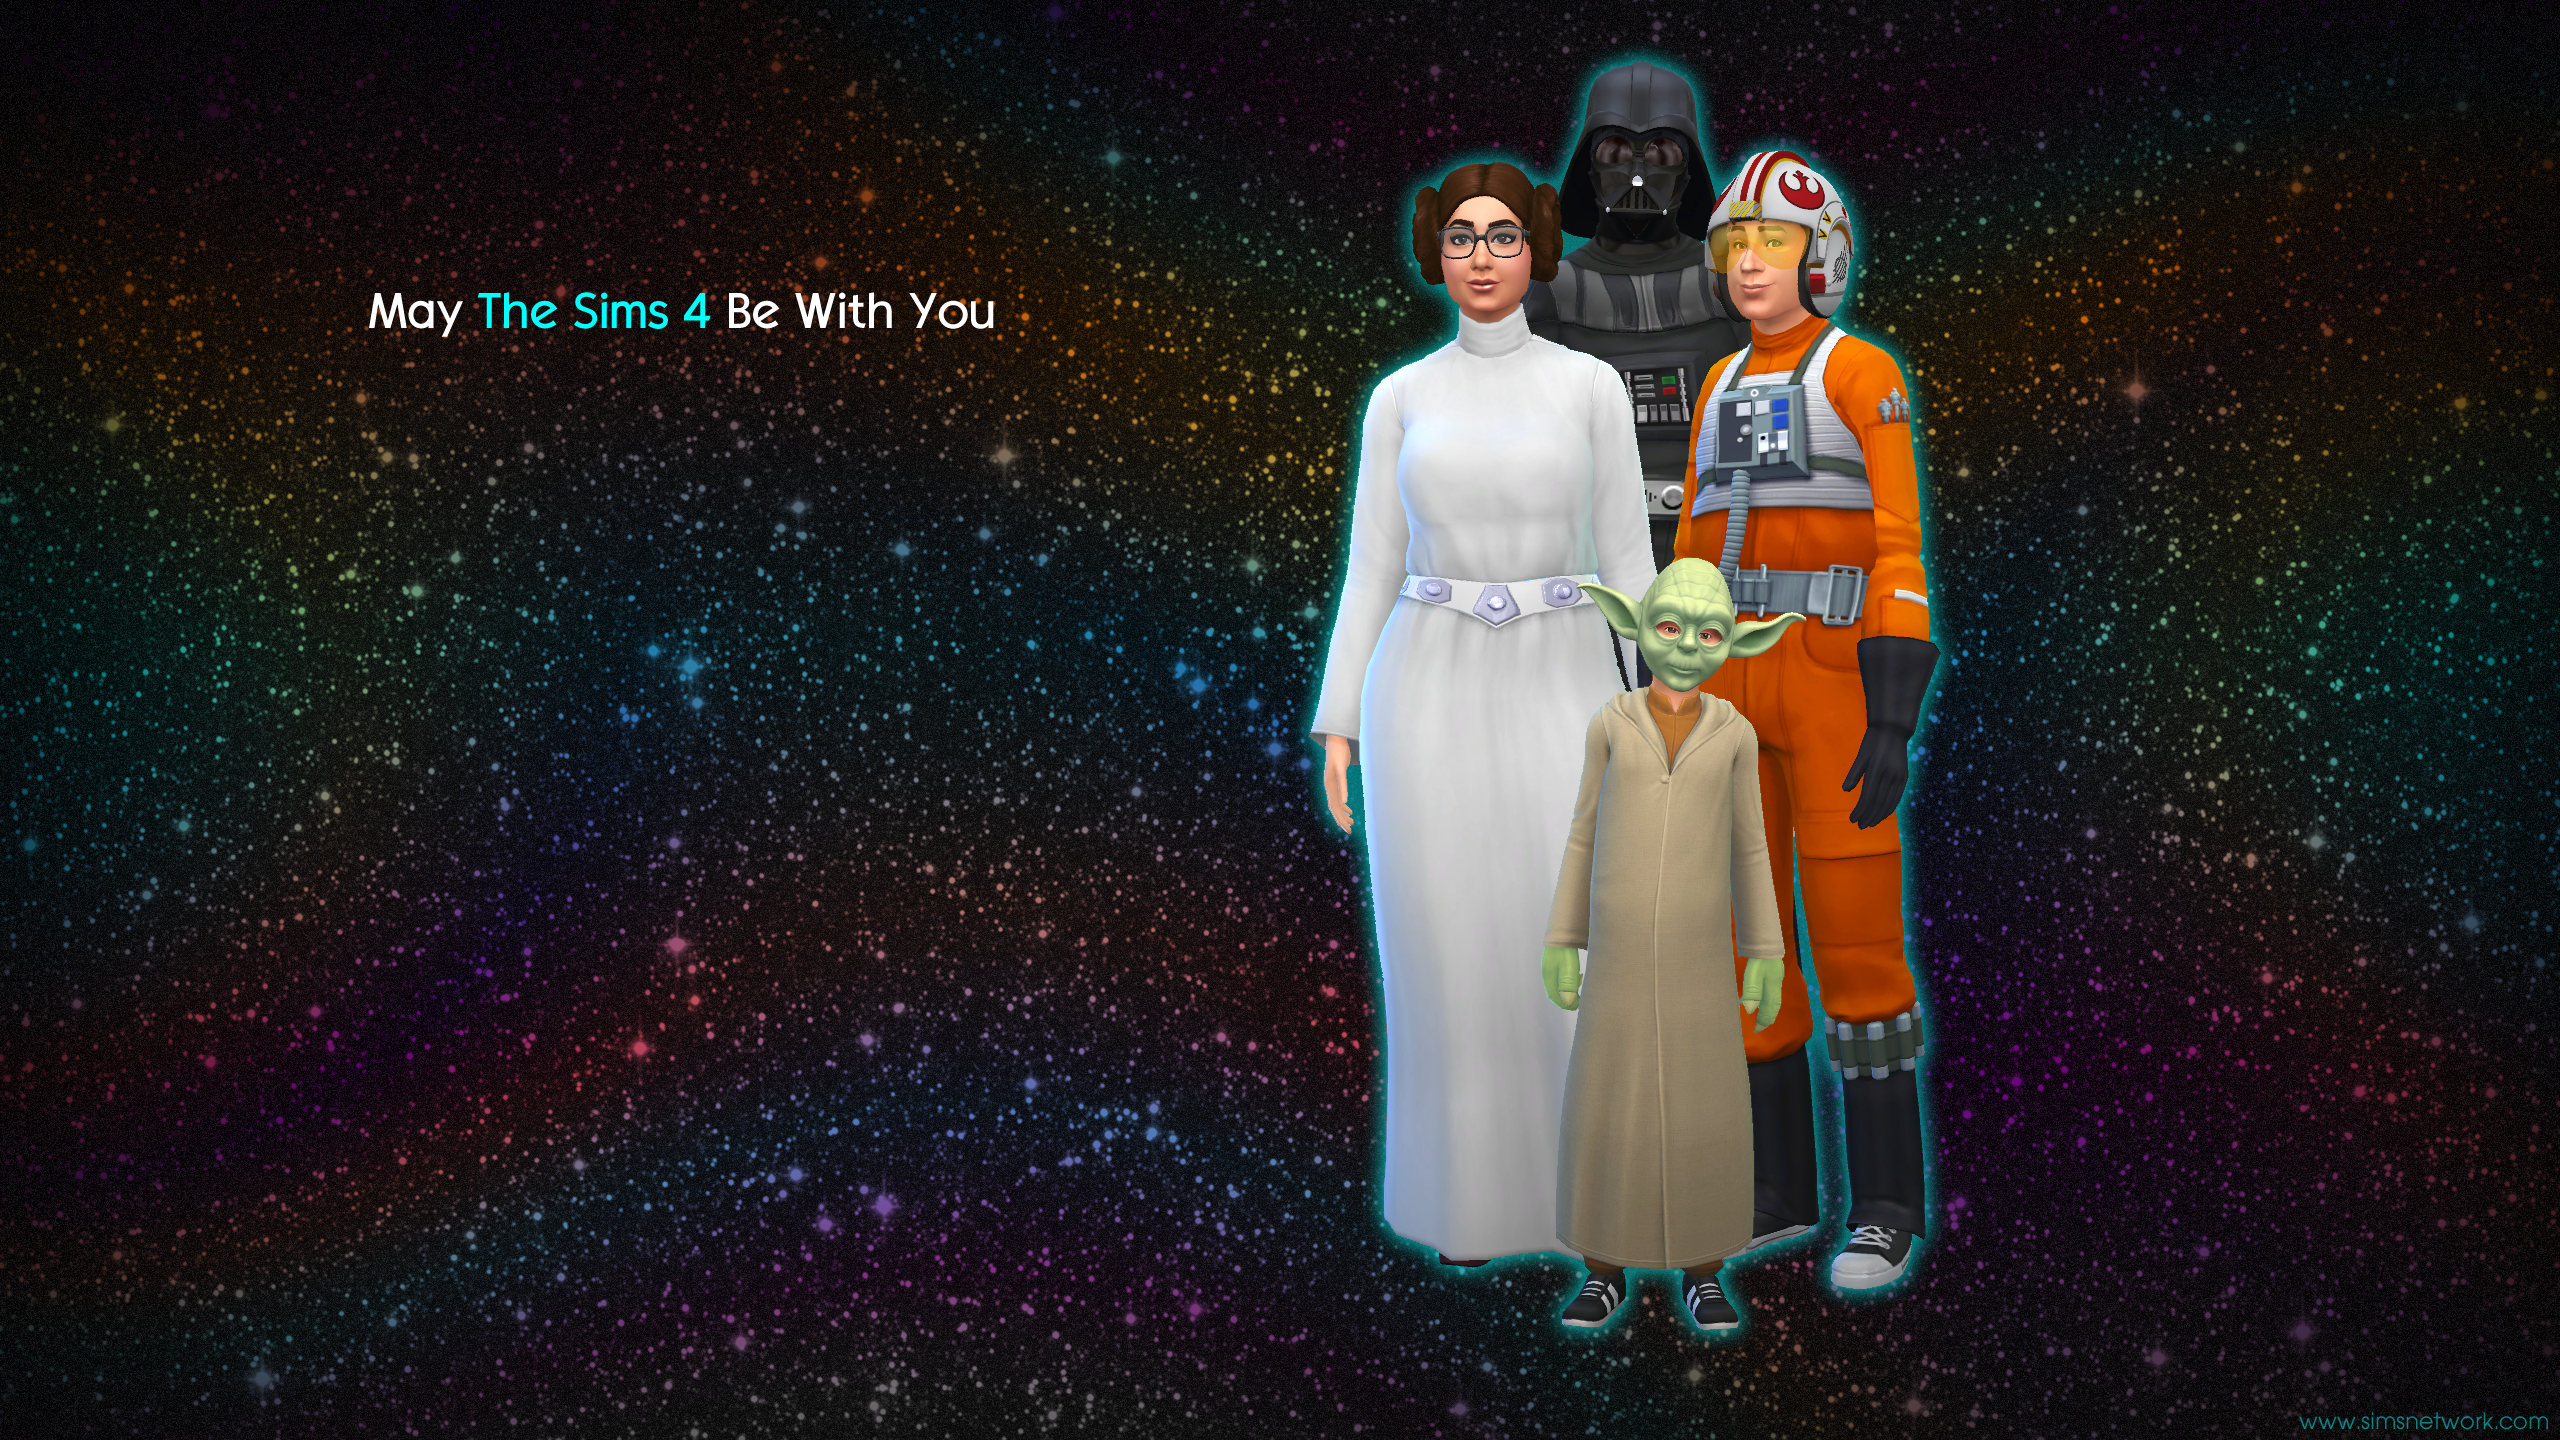 May The Sims Be With You Wallpaper Snw Simswork